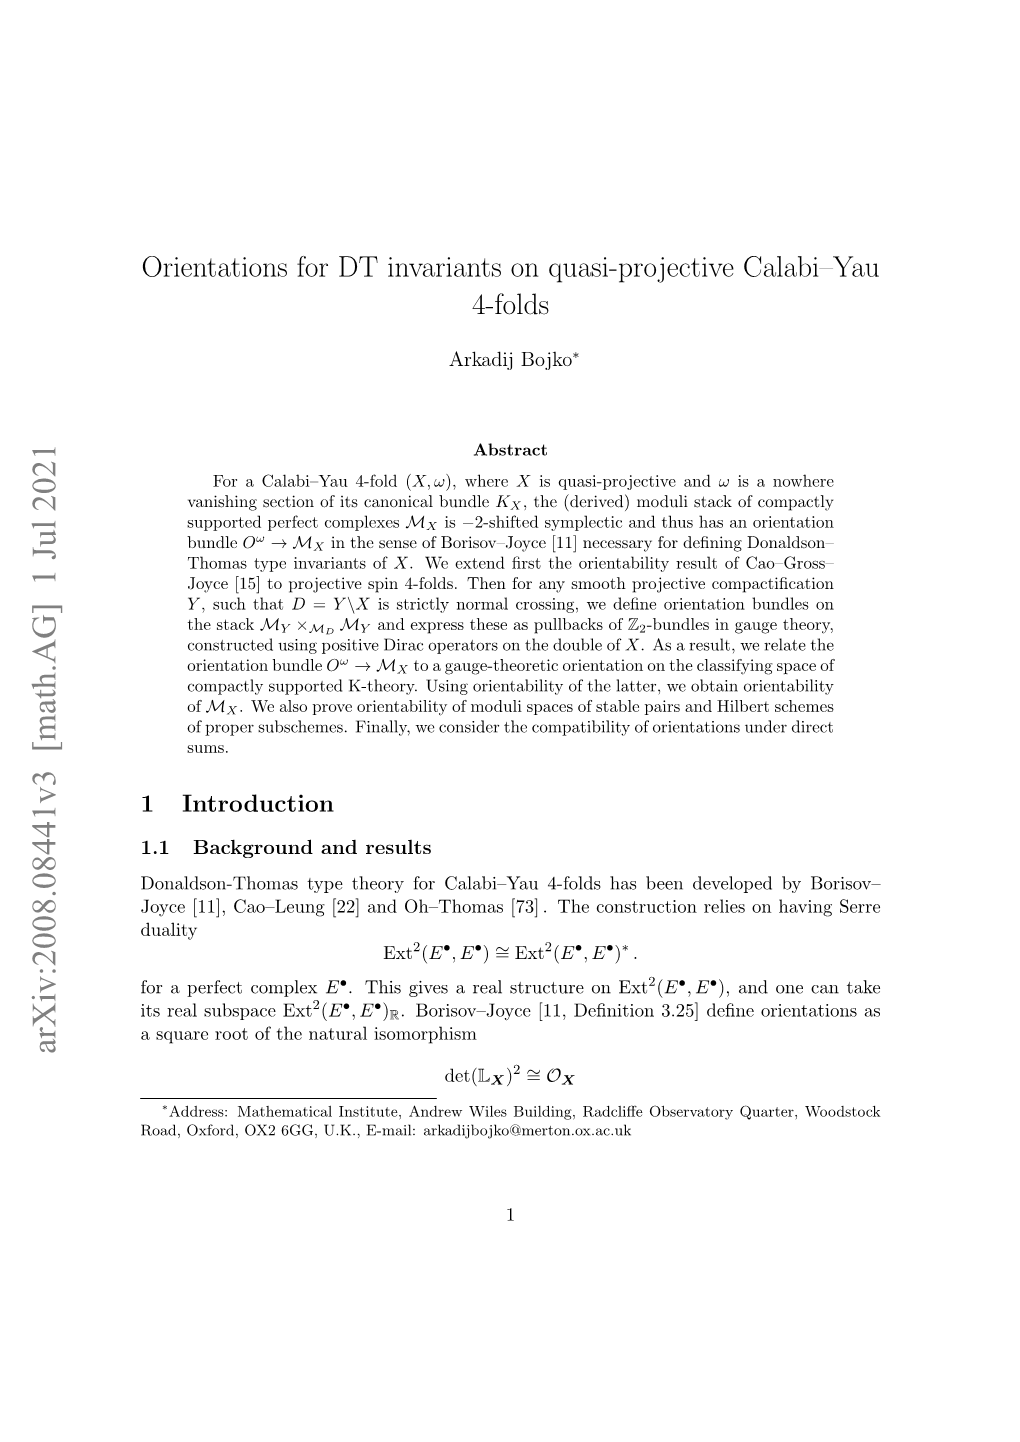 Orientations for DT Invariants on Quasi-Projective Calabi-Yau 4-Folds